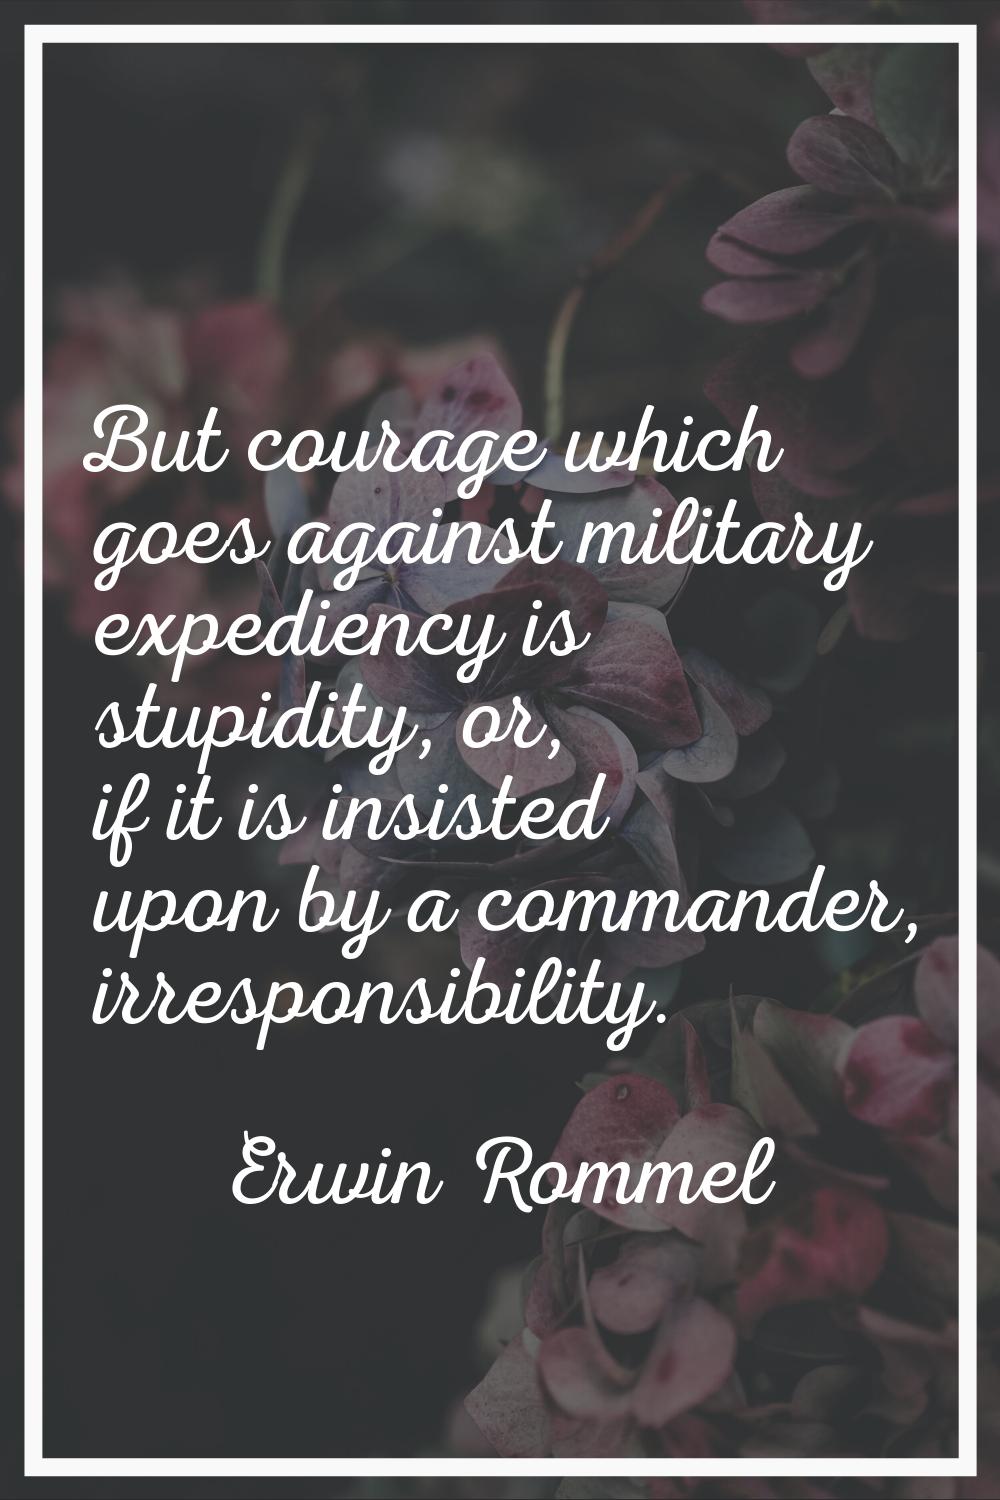 But courage which goes against military expediency is stupidity, or, if it is insisted upon by a co